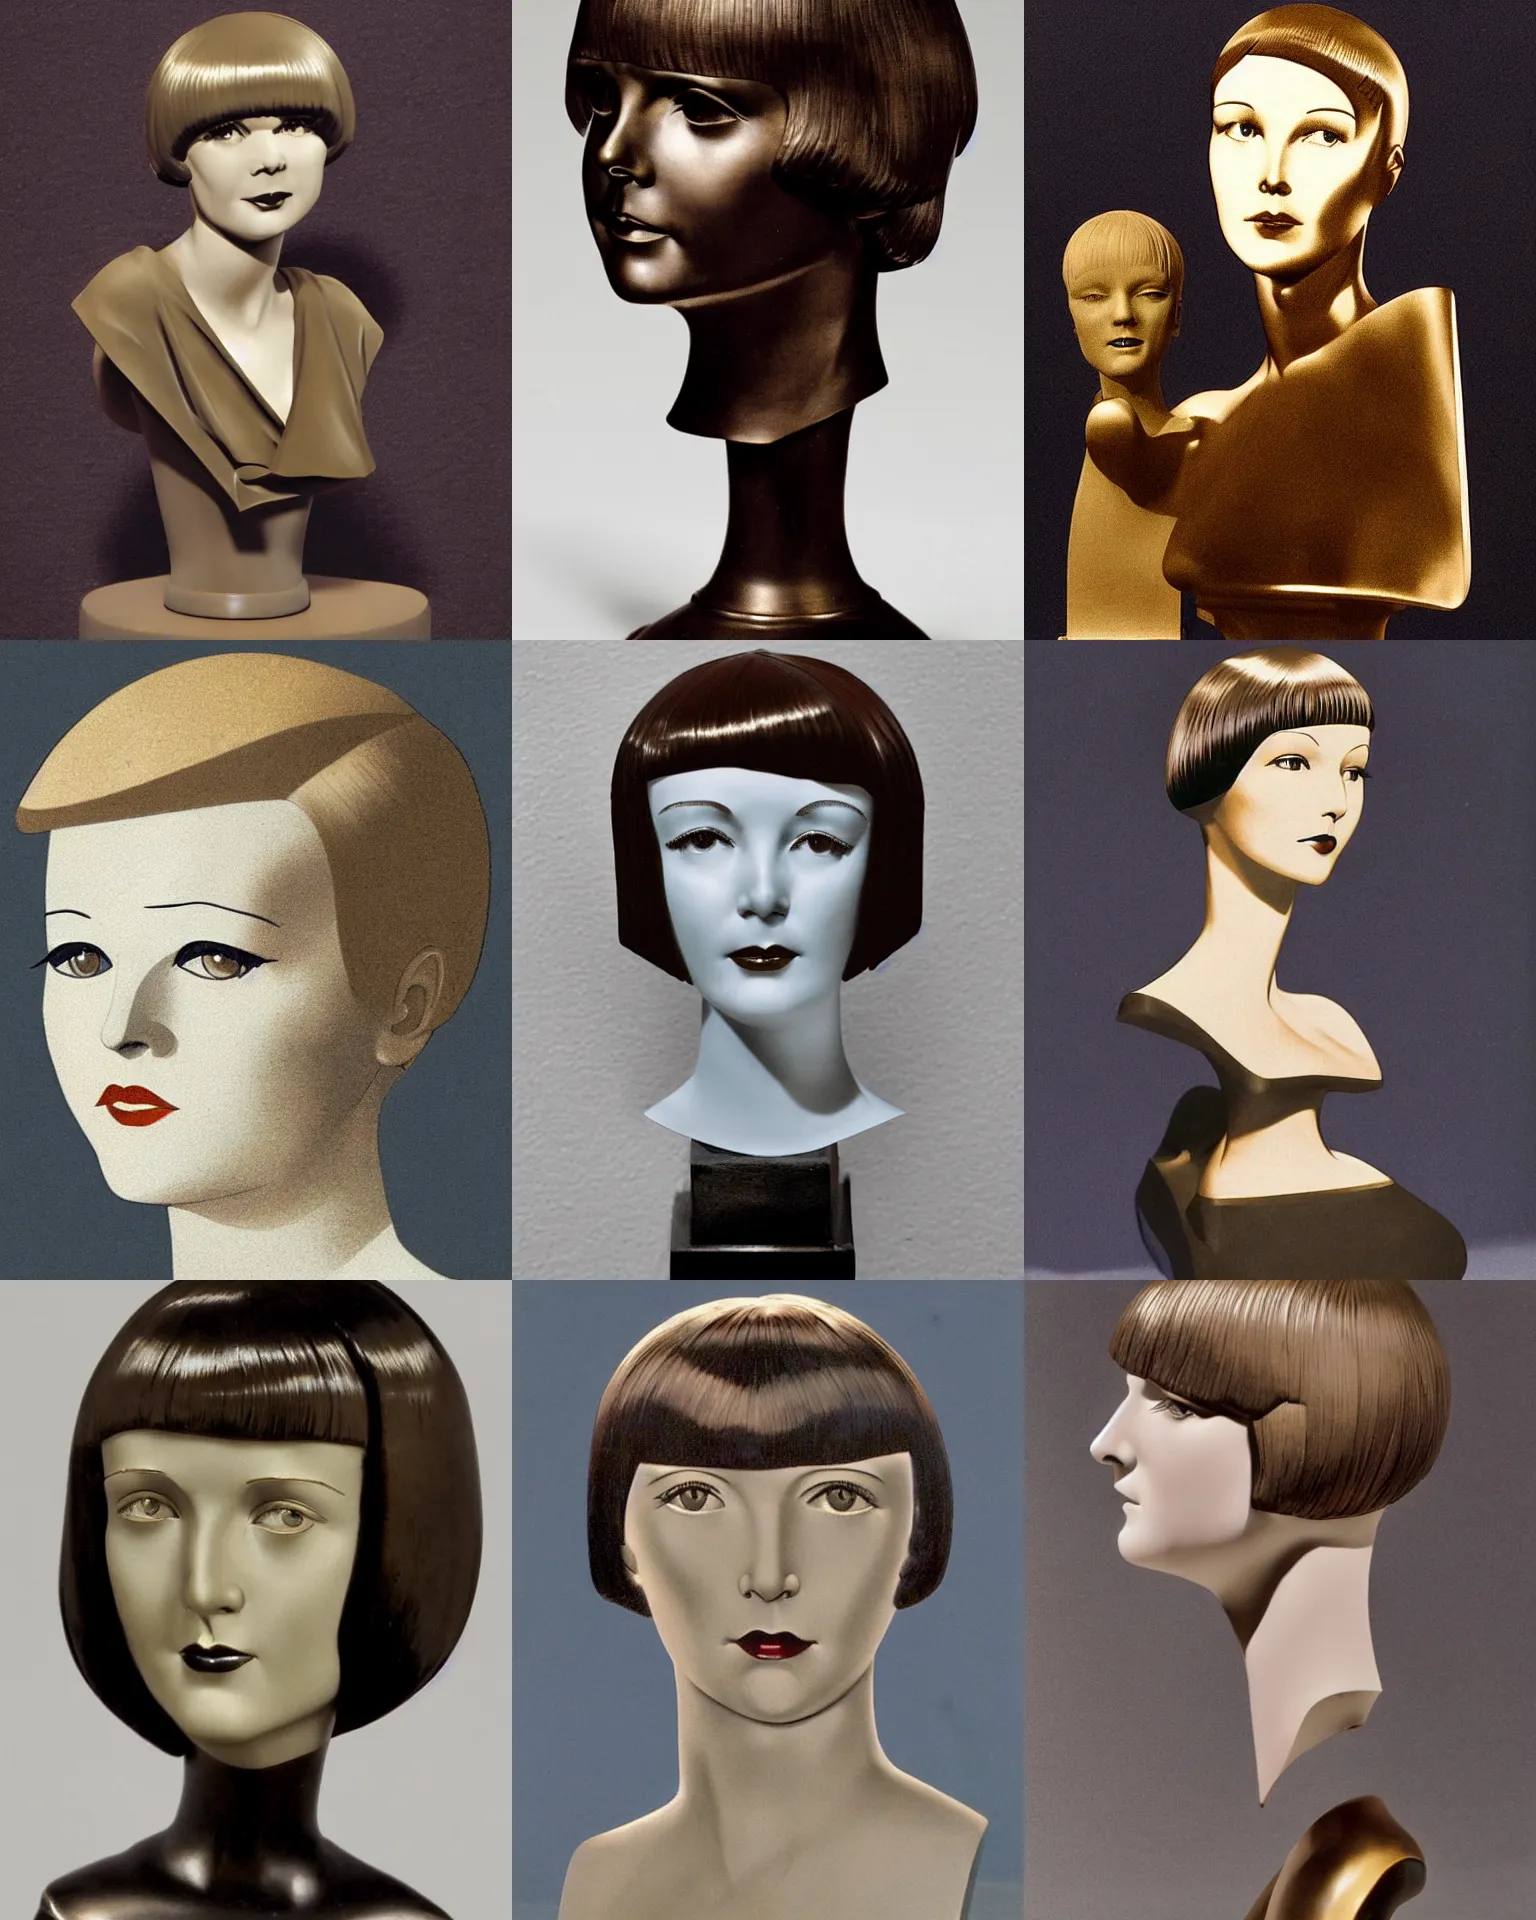 Prompt: bronze bust of mary louise brooks 2 0 years old, bob haircut, portrait by nicolay diulgheroff and patrick nagel, 1 9 2 0 s, art decos